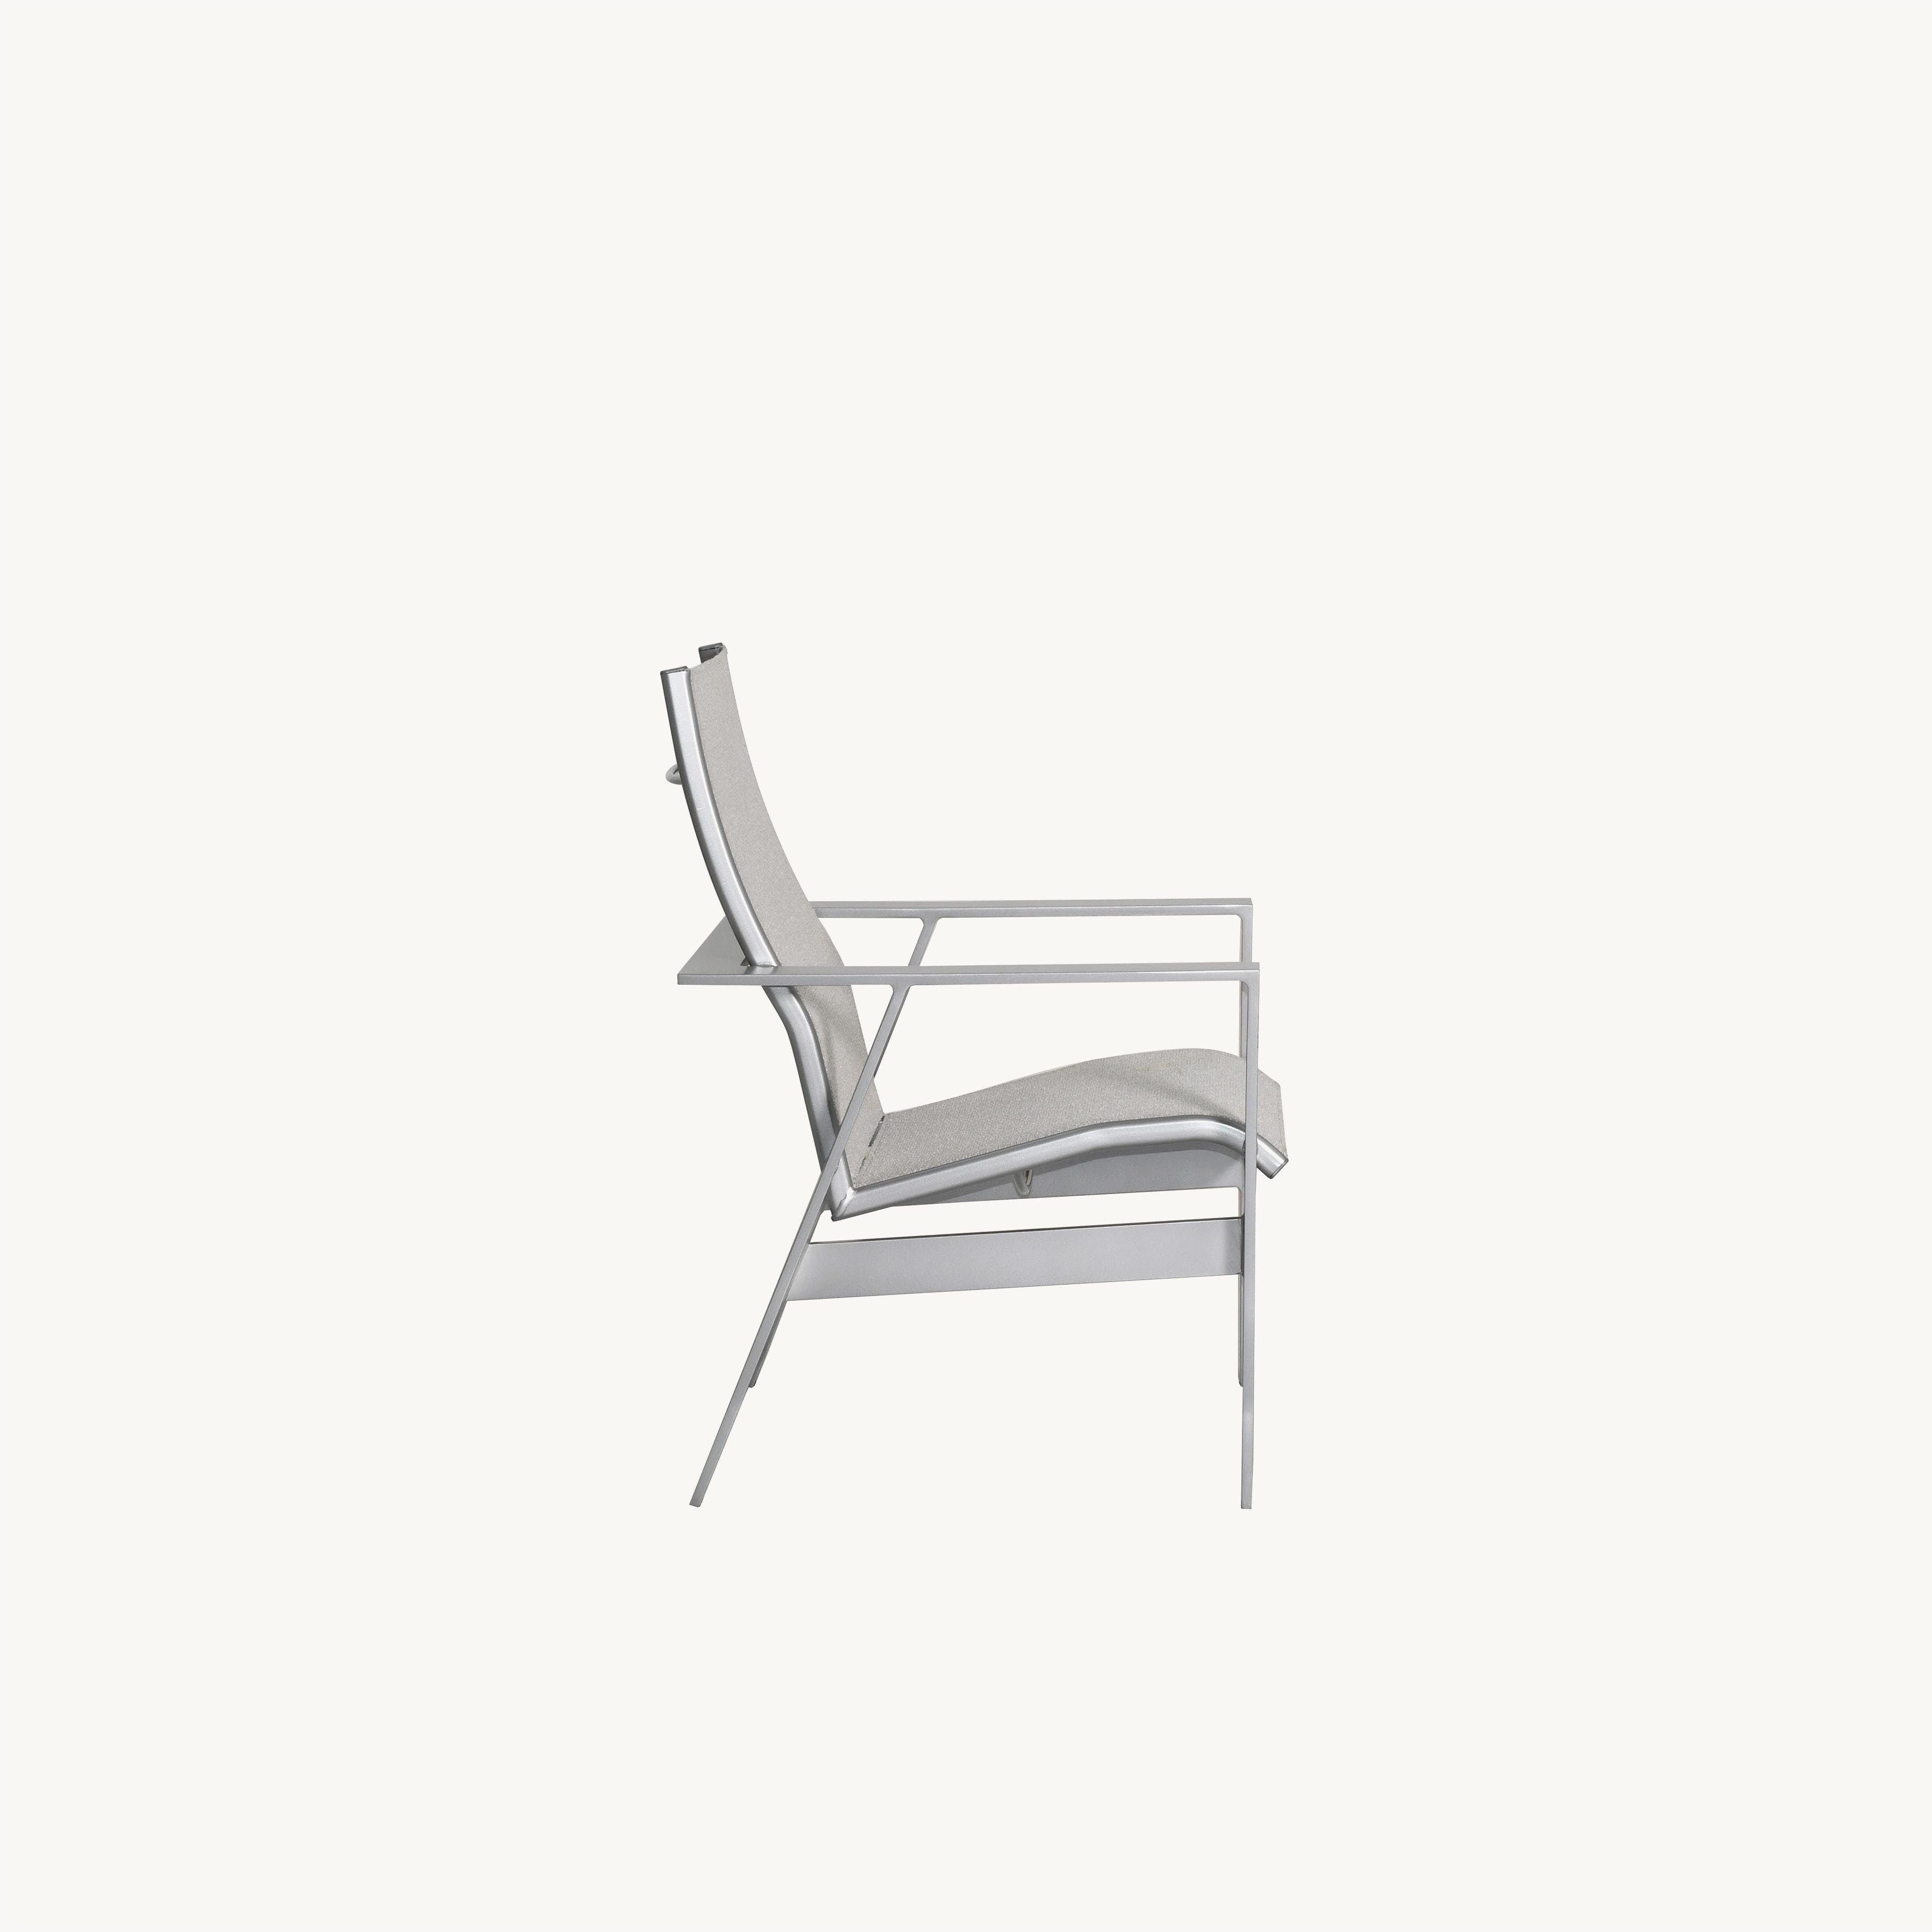 Trento Sling Dining Chair By Castelle